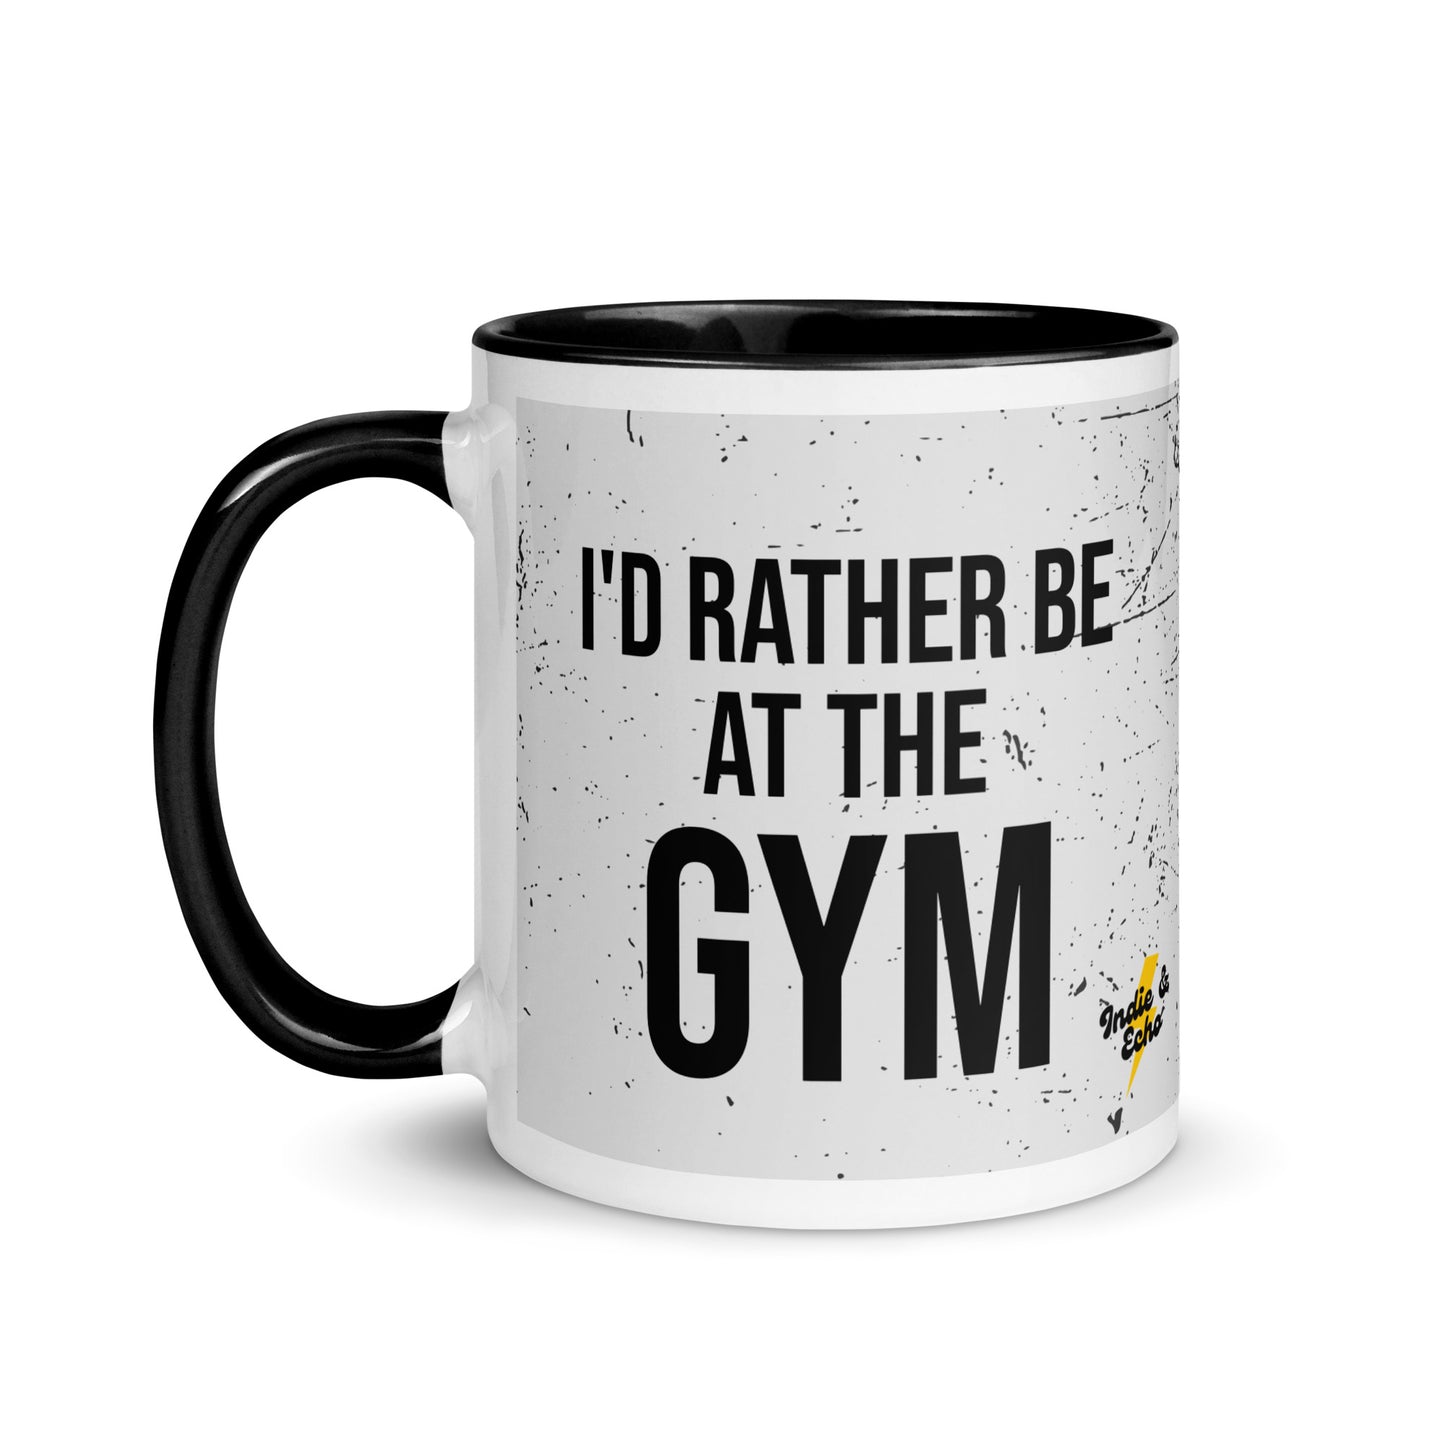 Black handled mug with I'd rather be at the gym written on it, across a grey splatter background. A gift for someone who loves the gym.